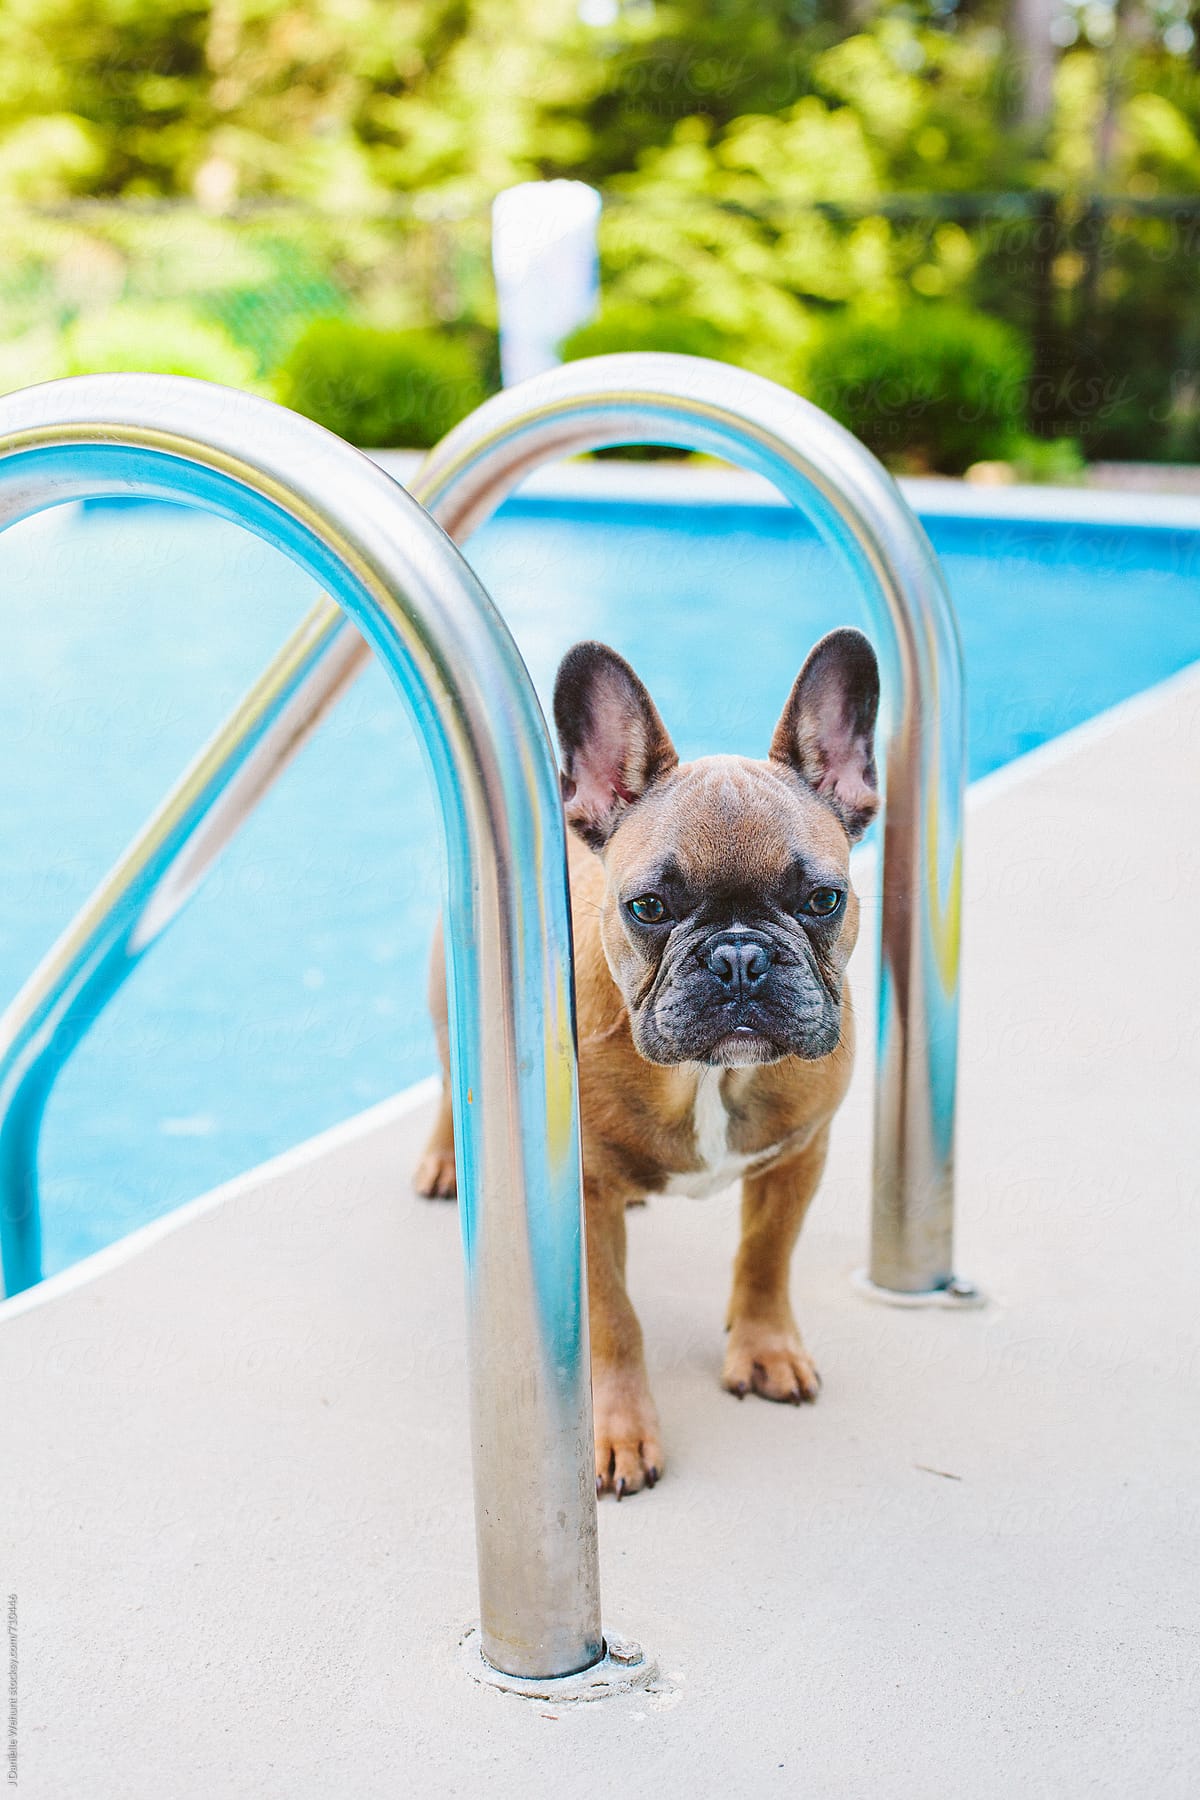 A blue fawn french bulldog hanging out by the pool.